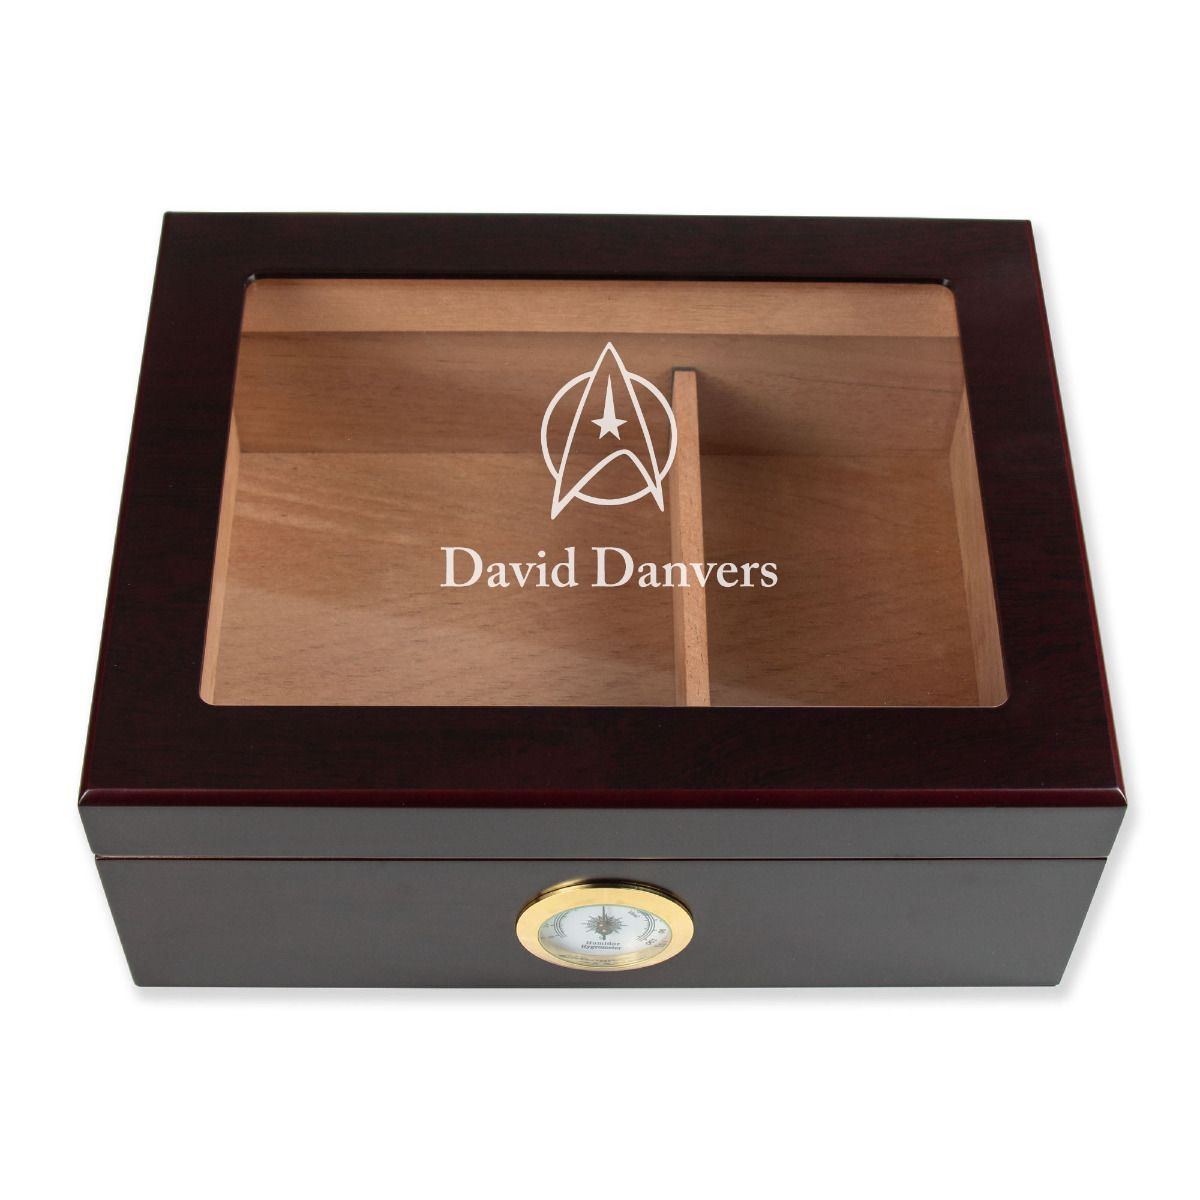 Personalized Cigar Humidor - Engraved Star Trek Logo Design - Man Cave Gift  Ideas - Gifts For Him - Promotional Products - Custom Gifts - Party Favors  - Corporate Gifts - Personalized Gifts